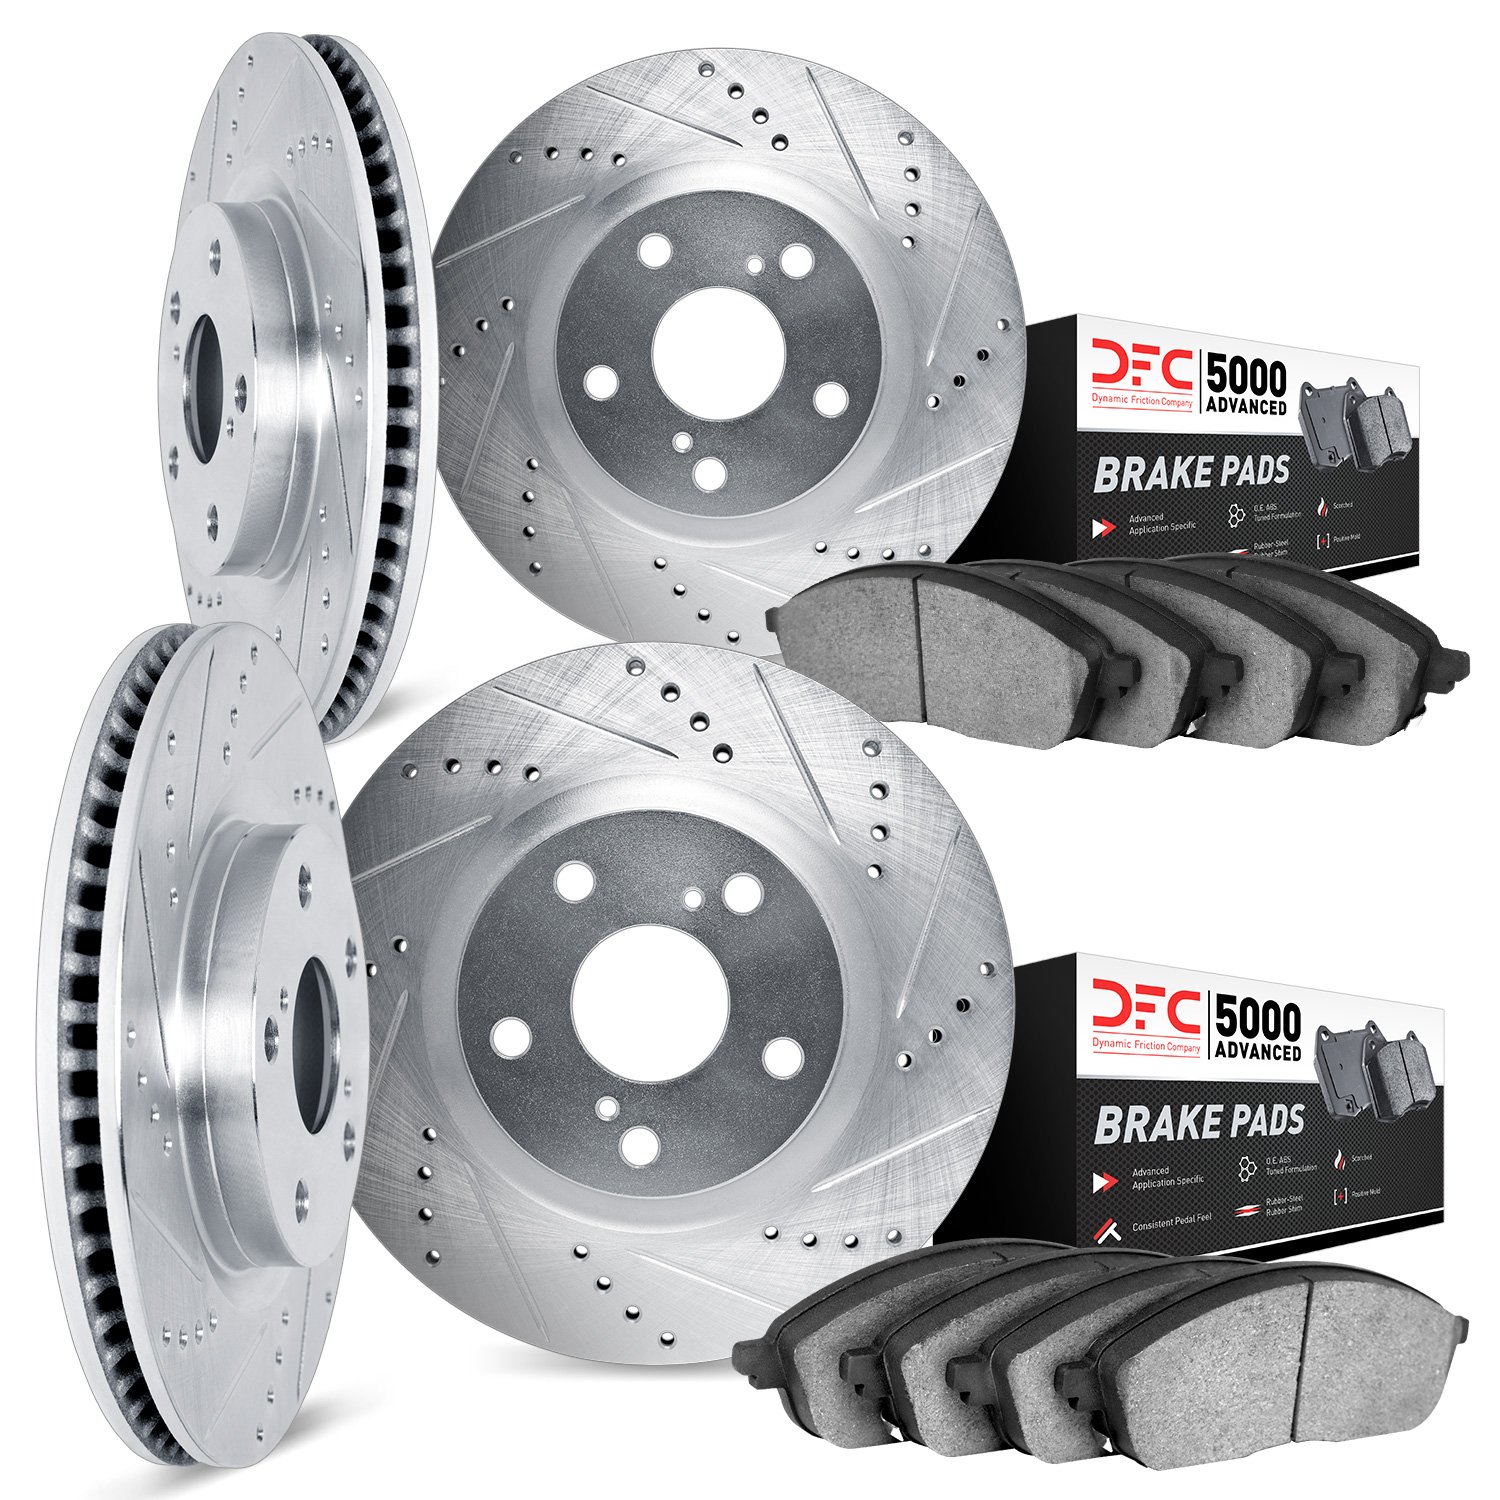 7504-31052 Drilled/Slotted Brake Rotors w/5000 Advanced Brake Pads Kit [Silver], 2007-2015 BMW, Position: Front and Rear